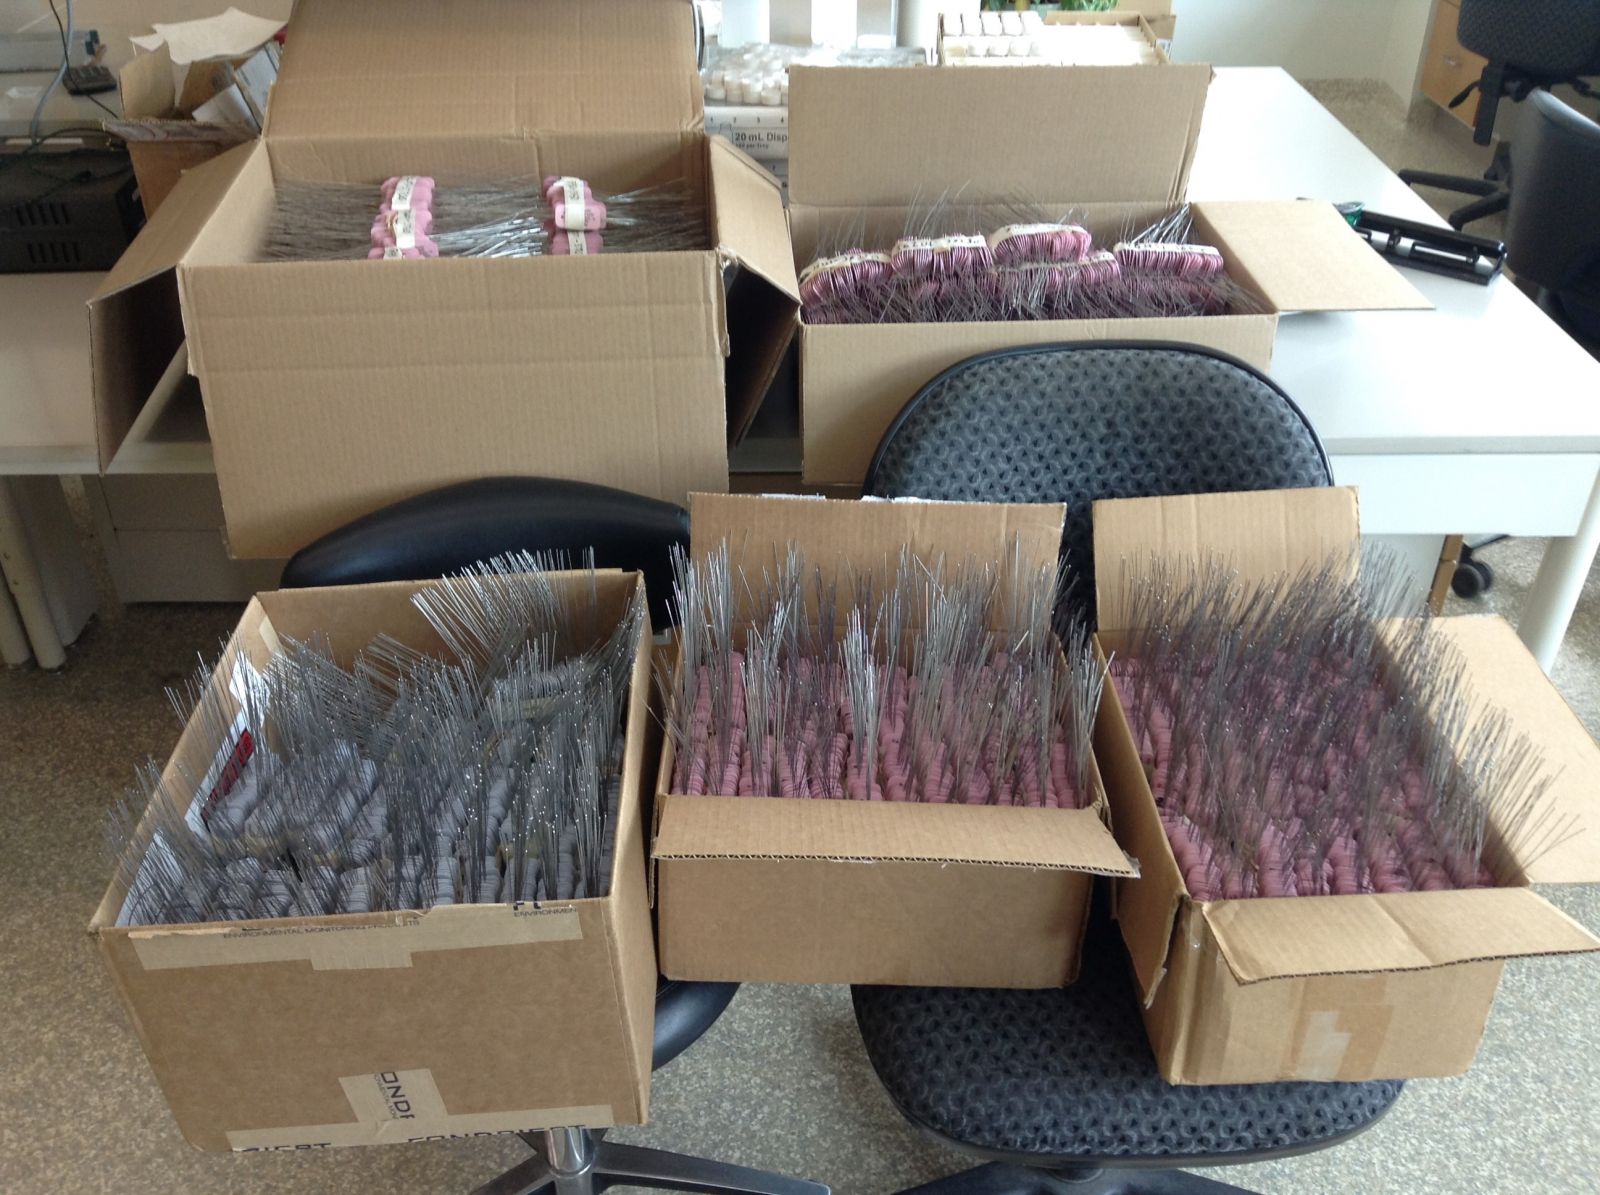 Over six thousand plastic tags, wired and ready to travel all around the Chesapeake Bay on the backs of blue crabs.